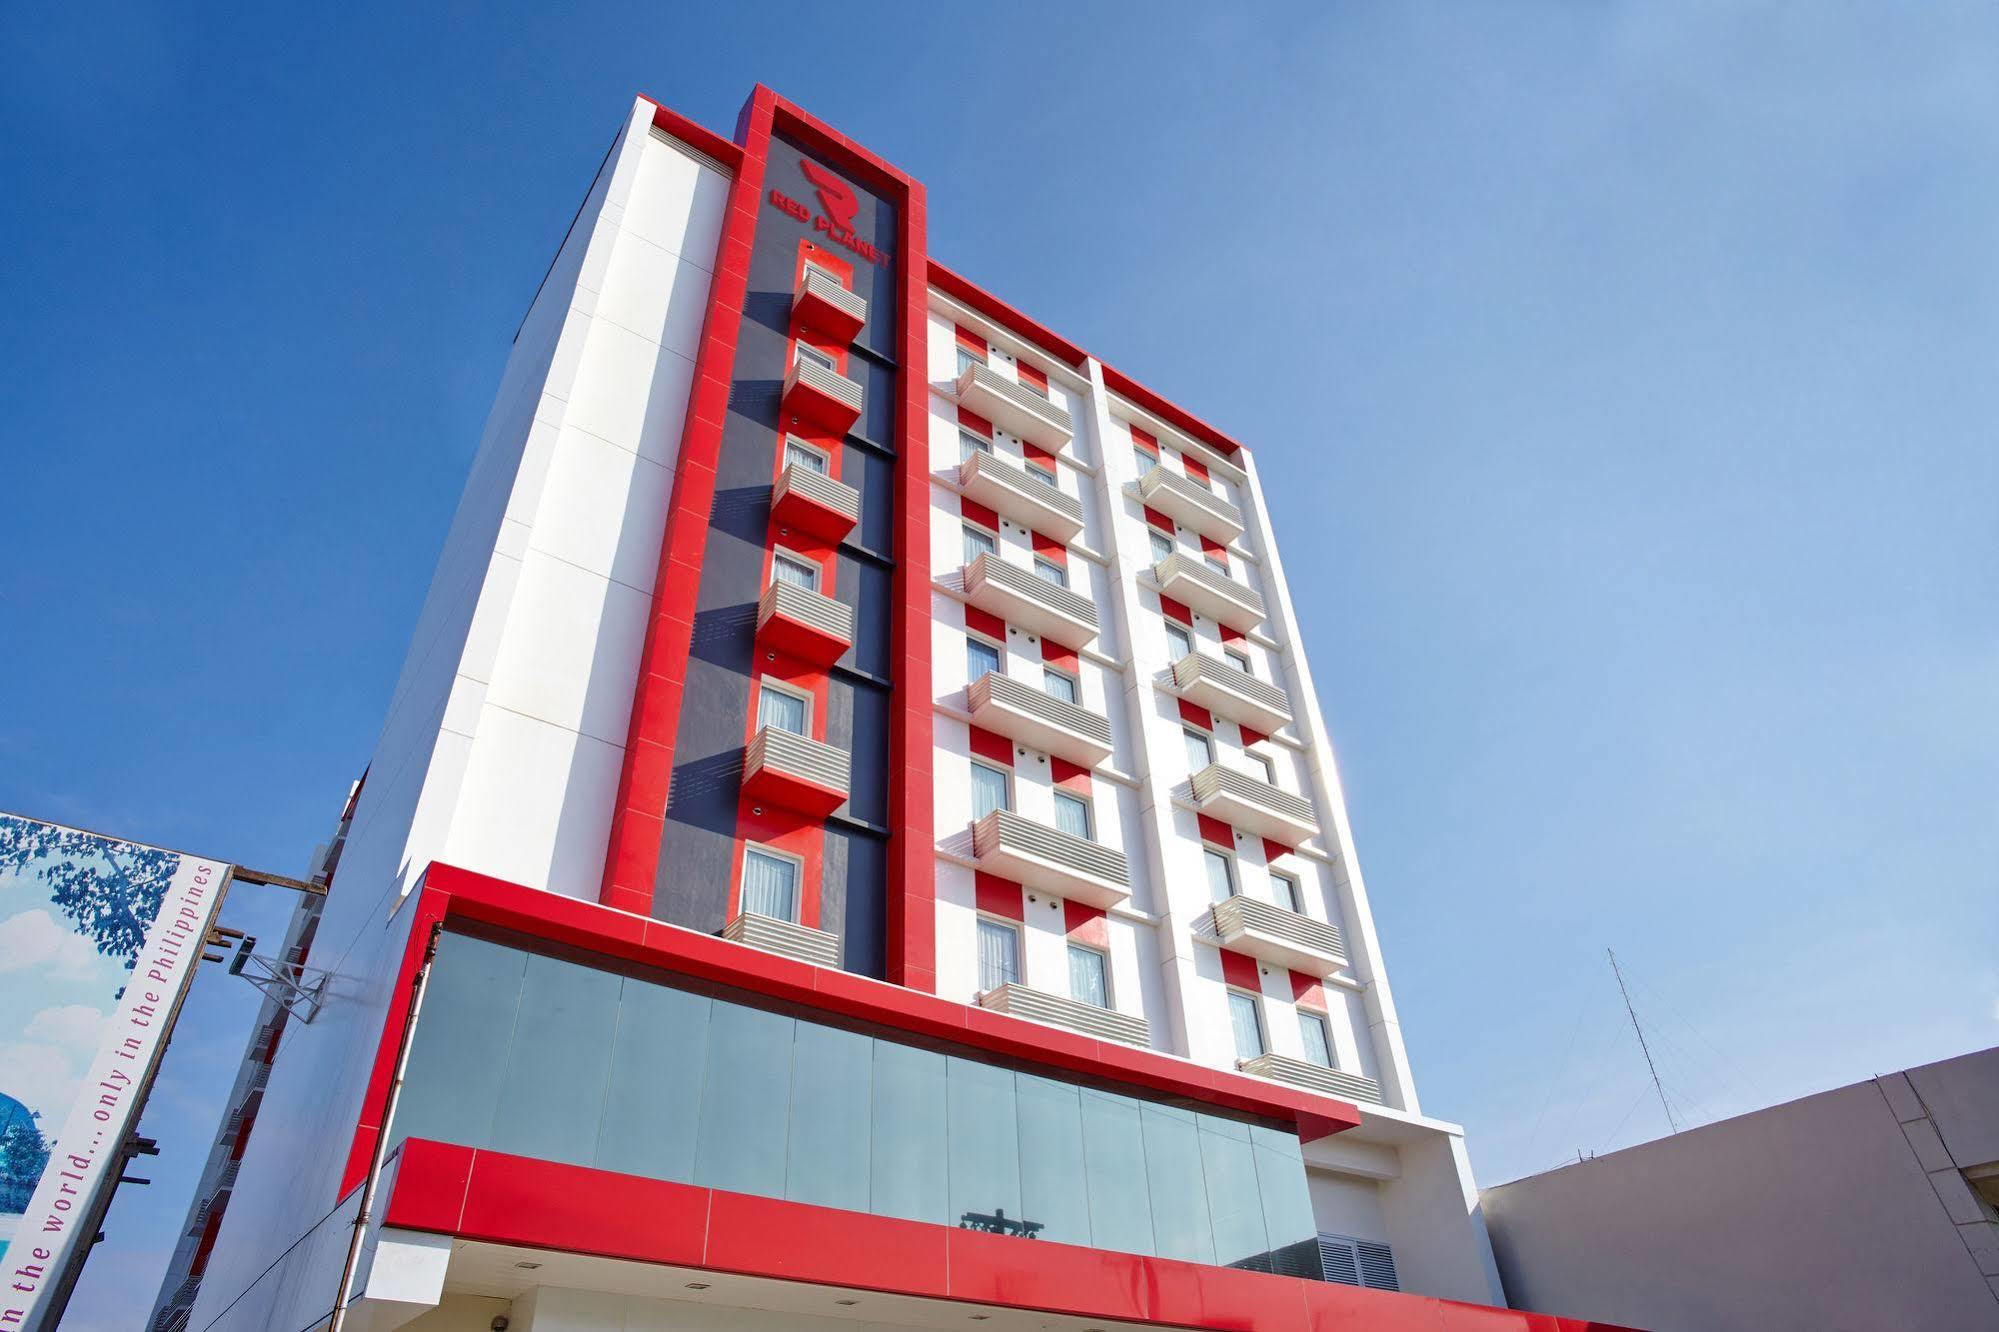 Hotel Red Planet Davao Stadt Exterior foto